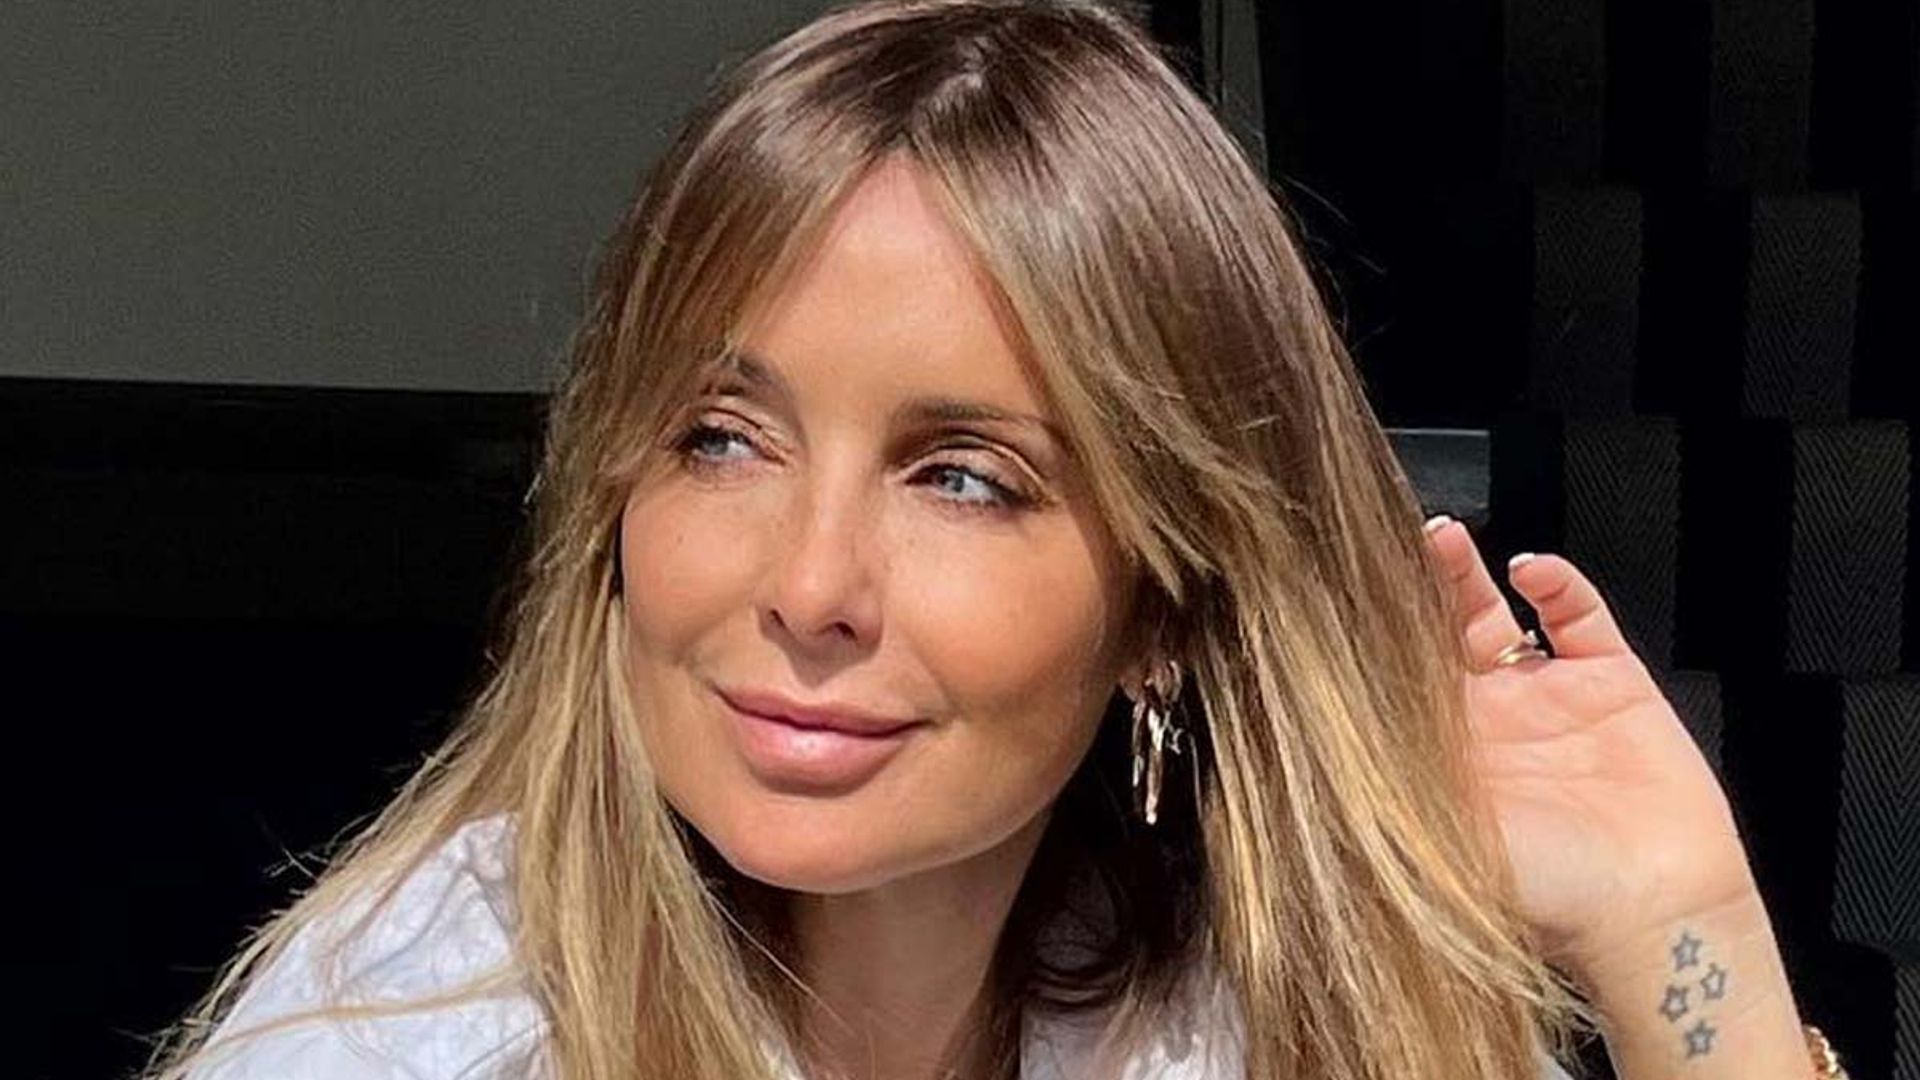 Louise Redknapp is a vision of summer in £18 playsuit - and fans are speechless